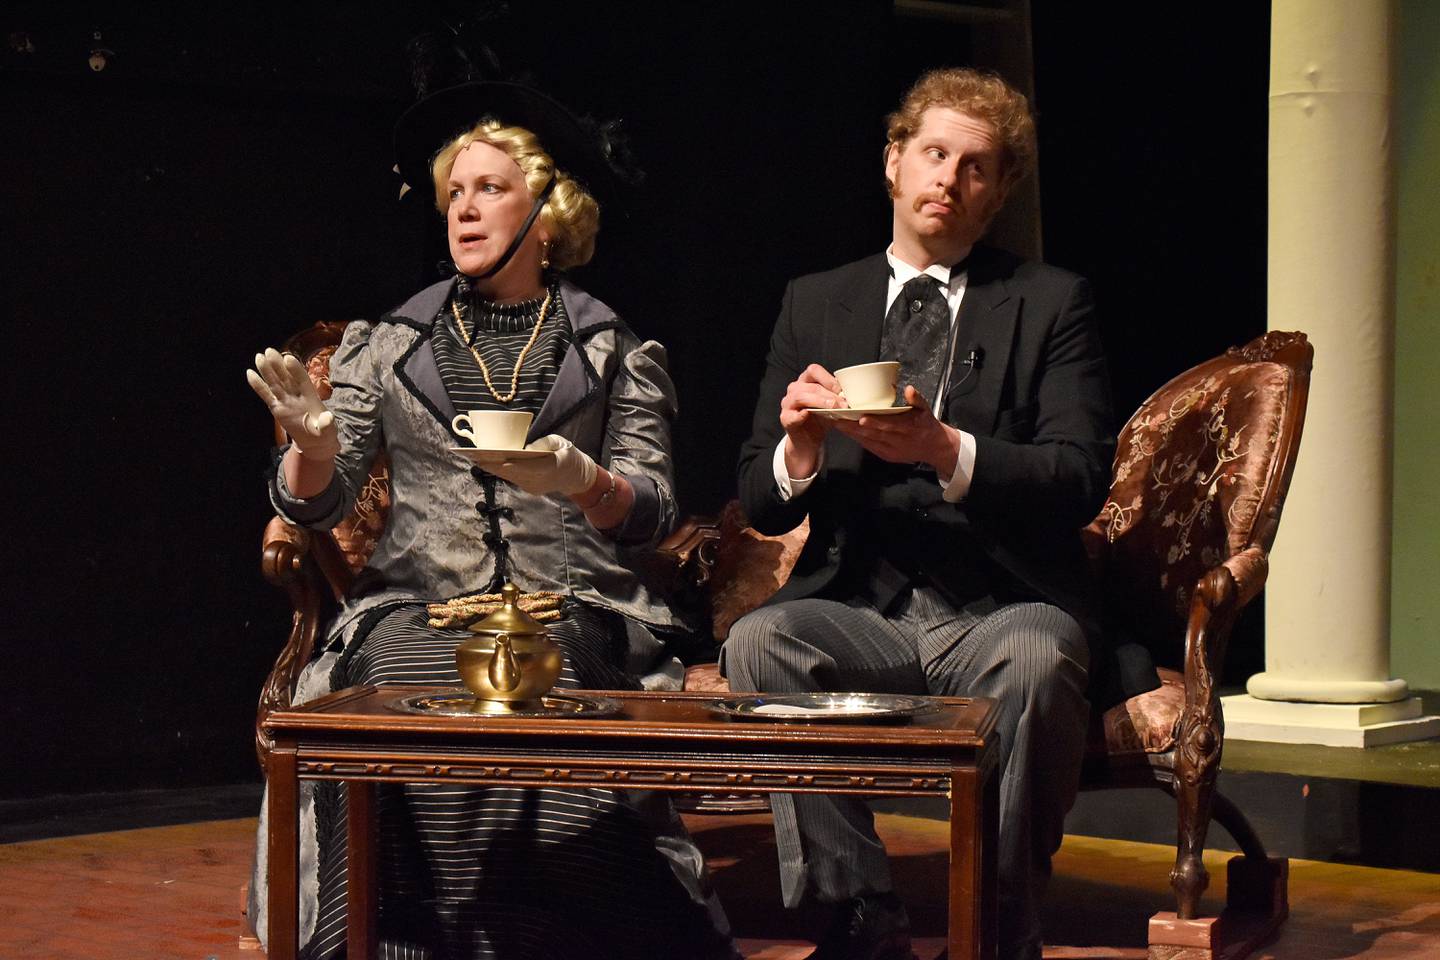 Lady Bracknell and Algernon in "The Importance of Being Earnest" at PM&L Theatre.